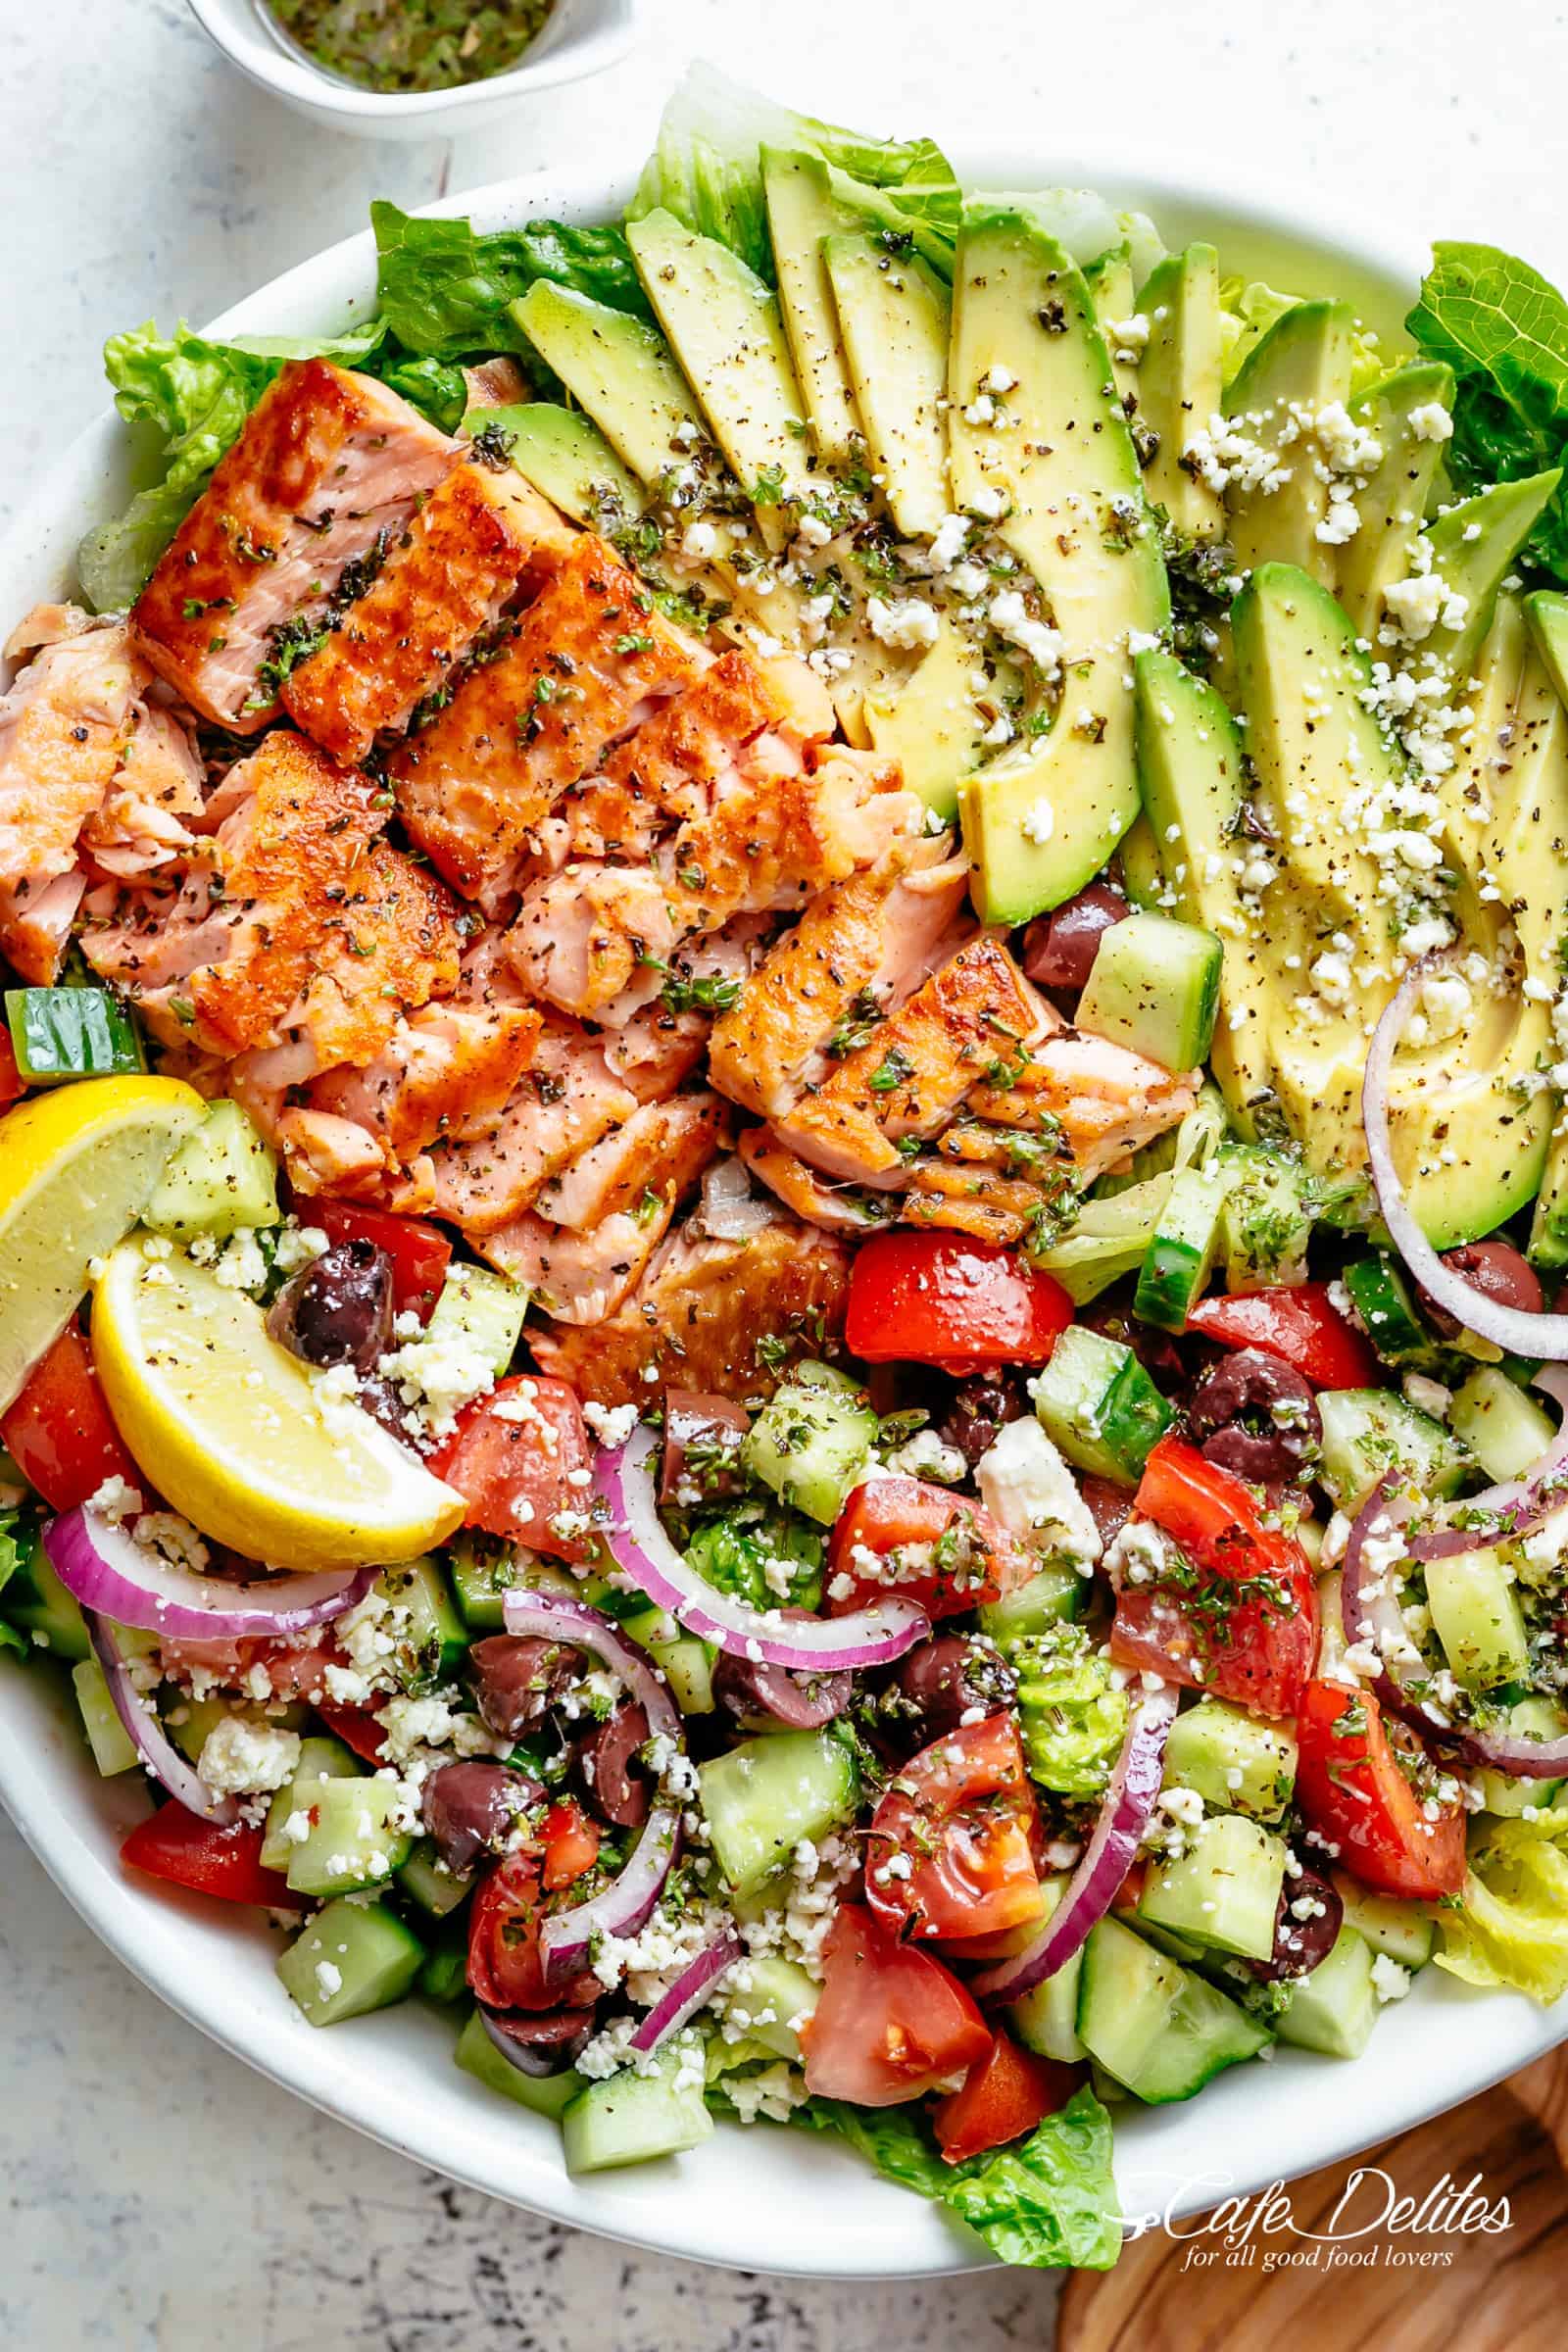 Avocado Salmon Salad with an incredible lemon herb Mediterranean dressing! Loaded with cucumber, olives, tomatoes and feta cheese! | cafedelites.com